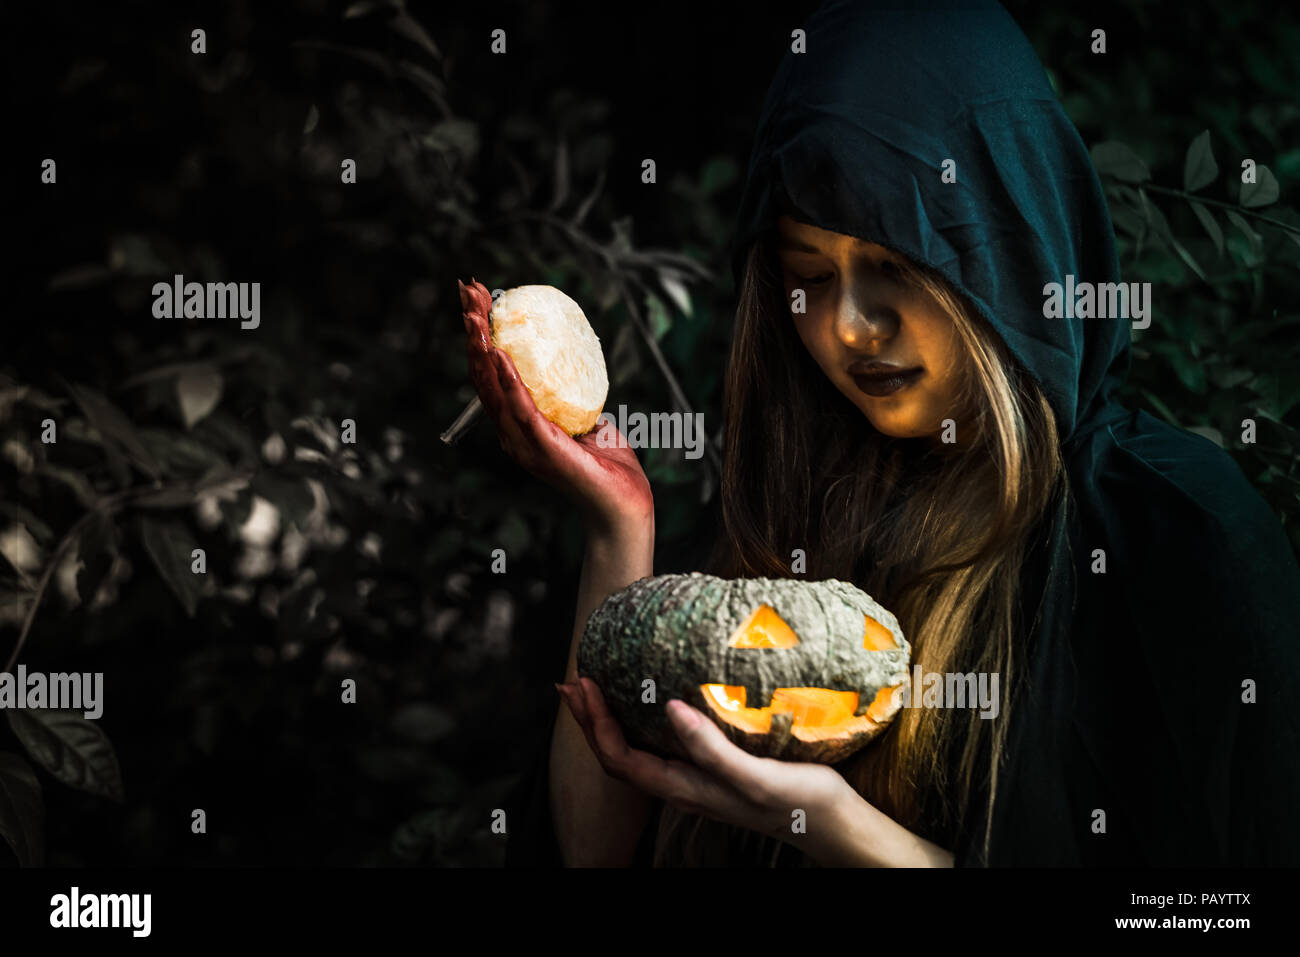 Witch opening pumpkin lid by hand. Old woman holding bright pumpkin in dark forest. Halloween day and Mystery concept. Fantasy of magic theme. Demon a Stock Photo